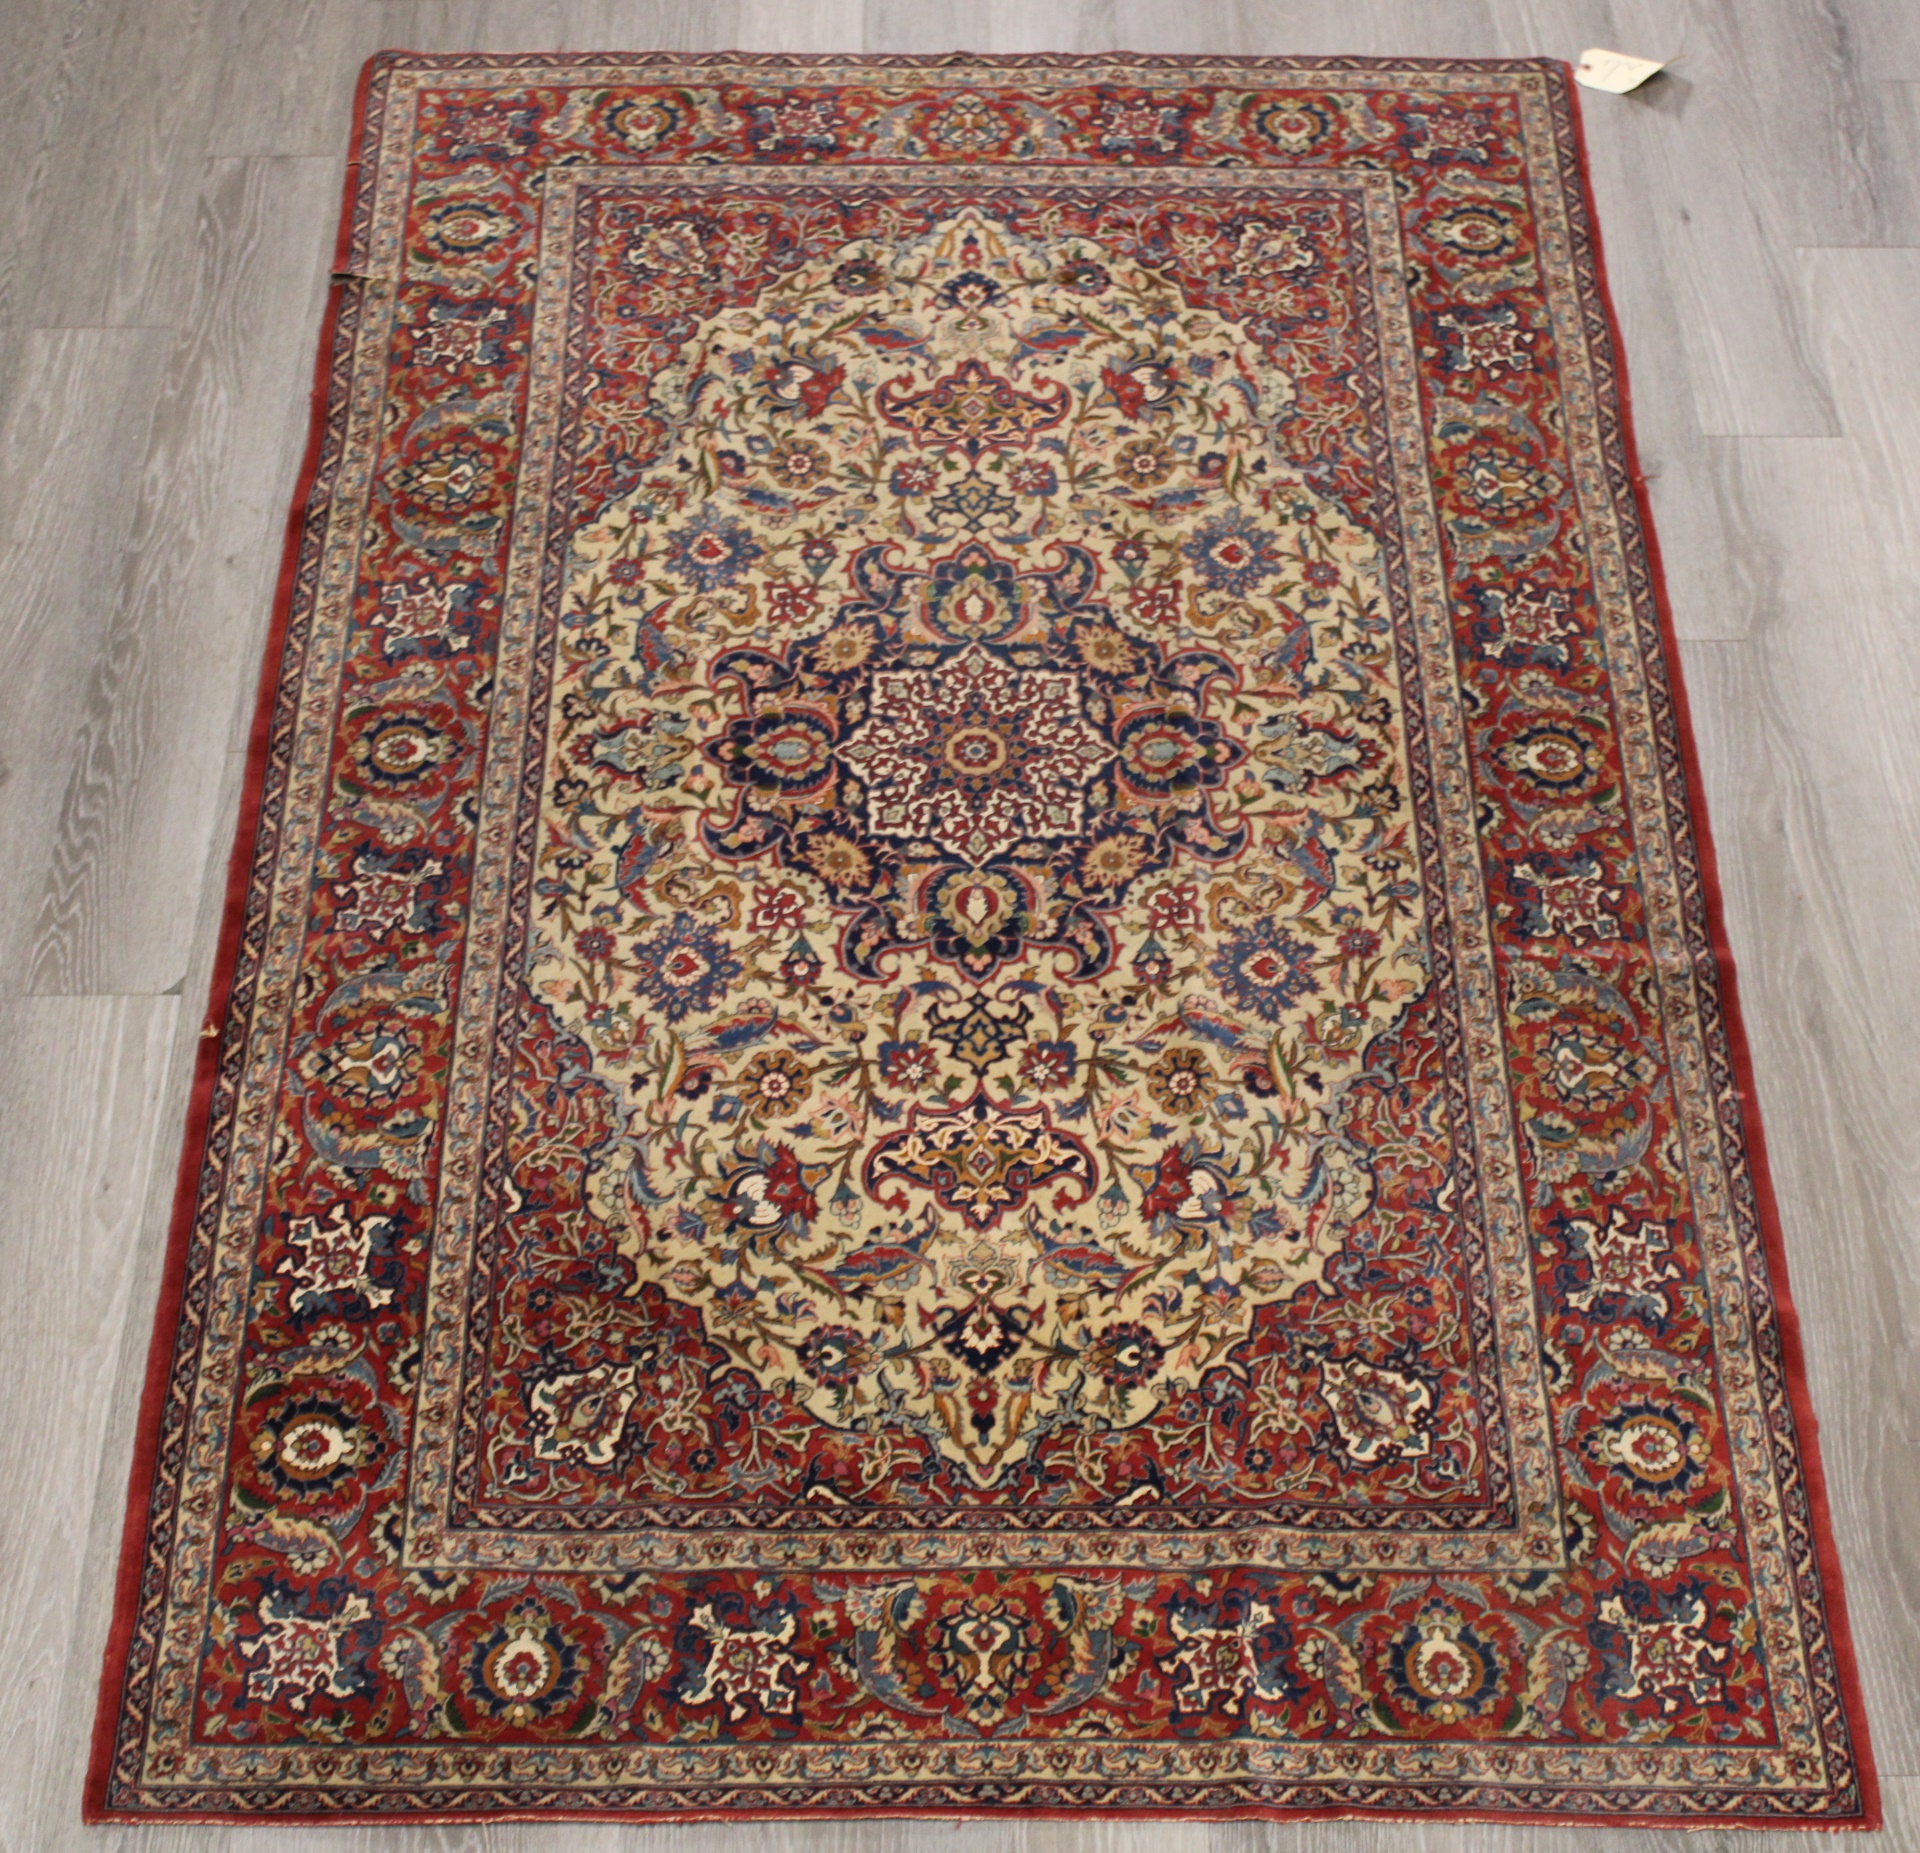 ANTIQUE AND FINELY HAND WOVEN TABRIZ